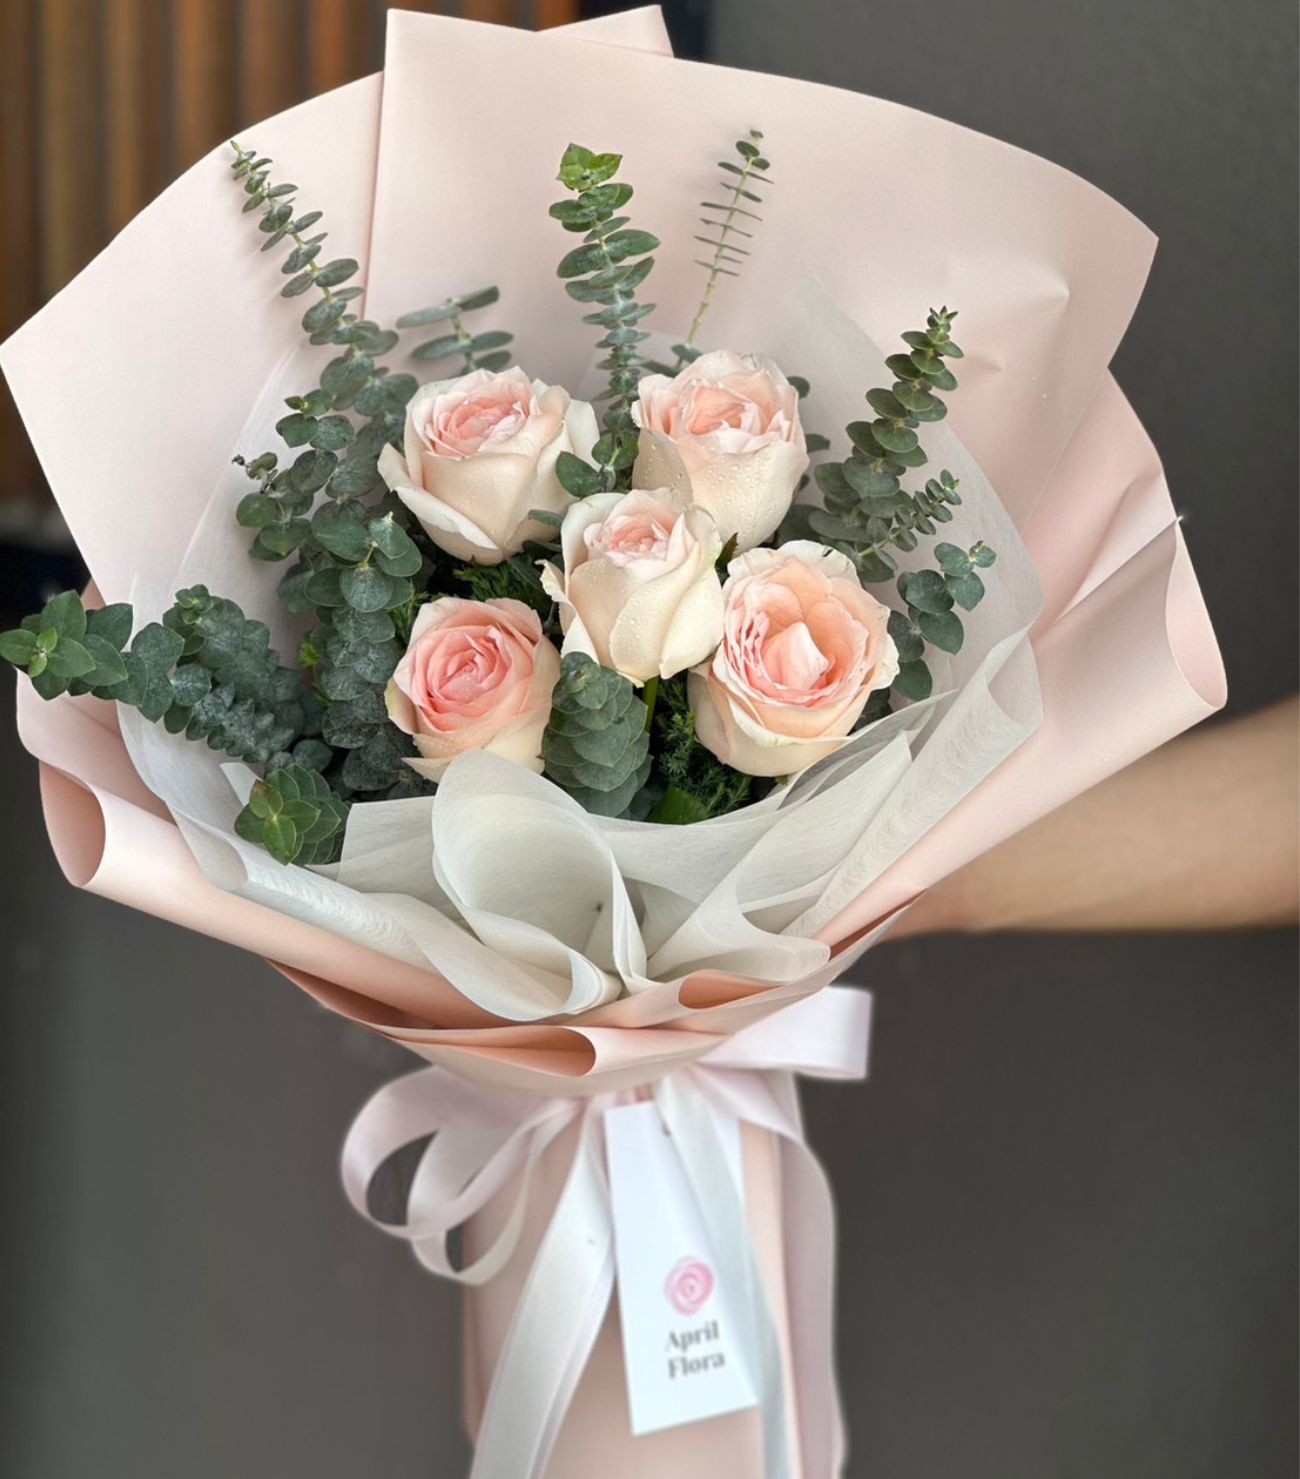 "My Angel" bouquet of 5 pink roses